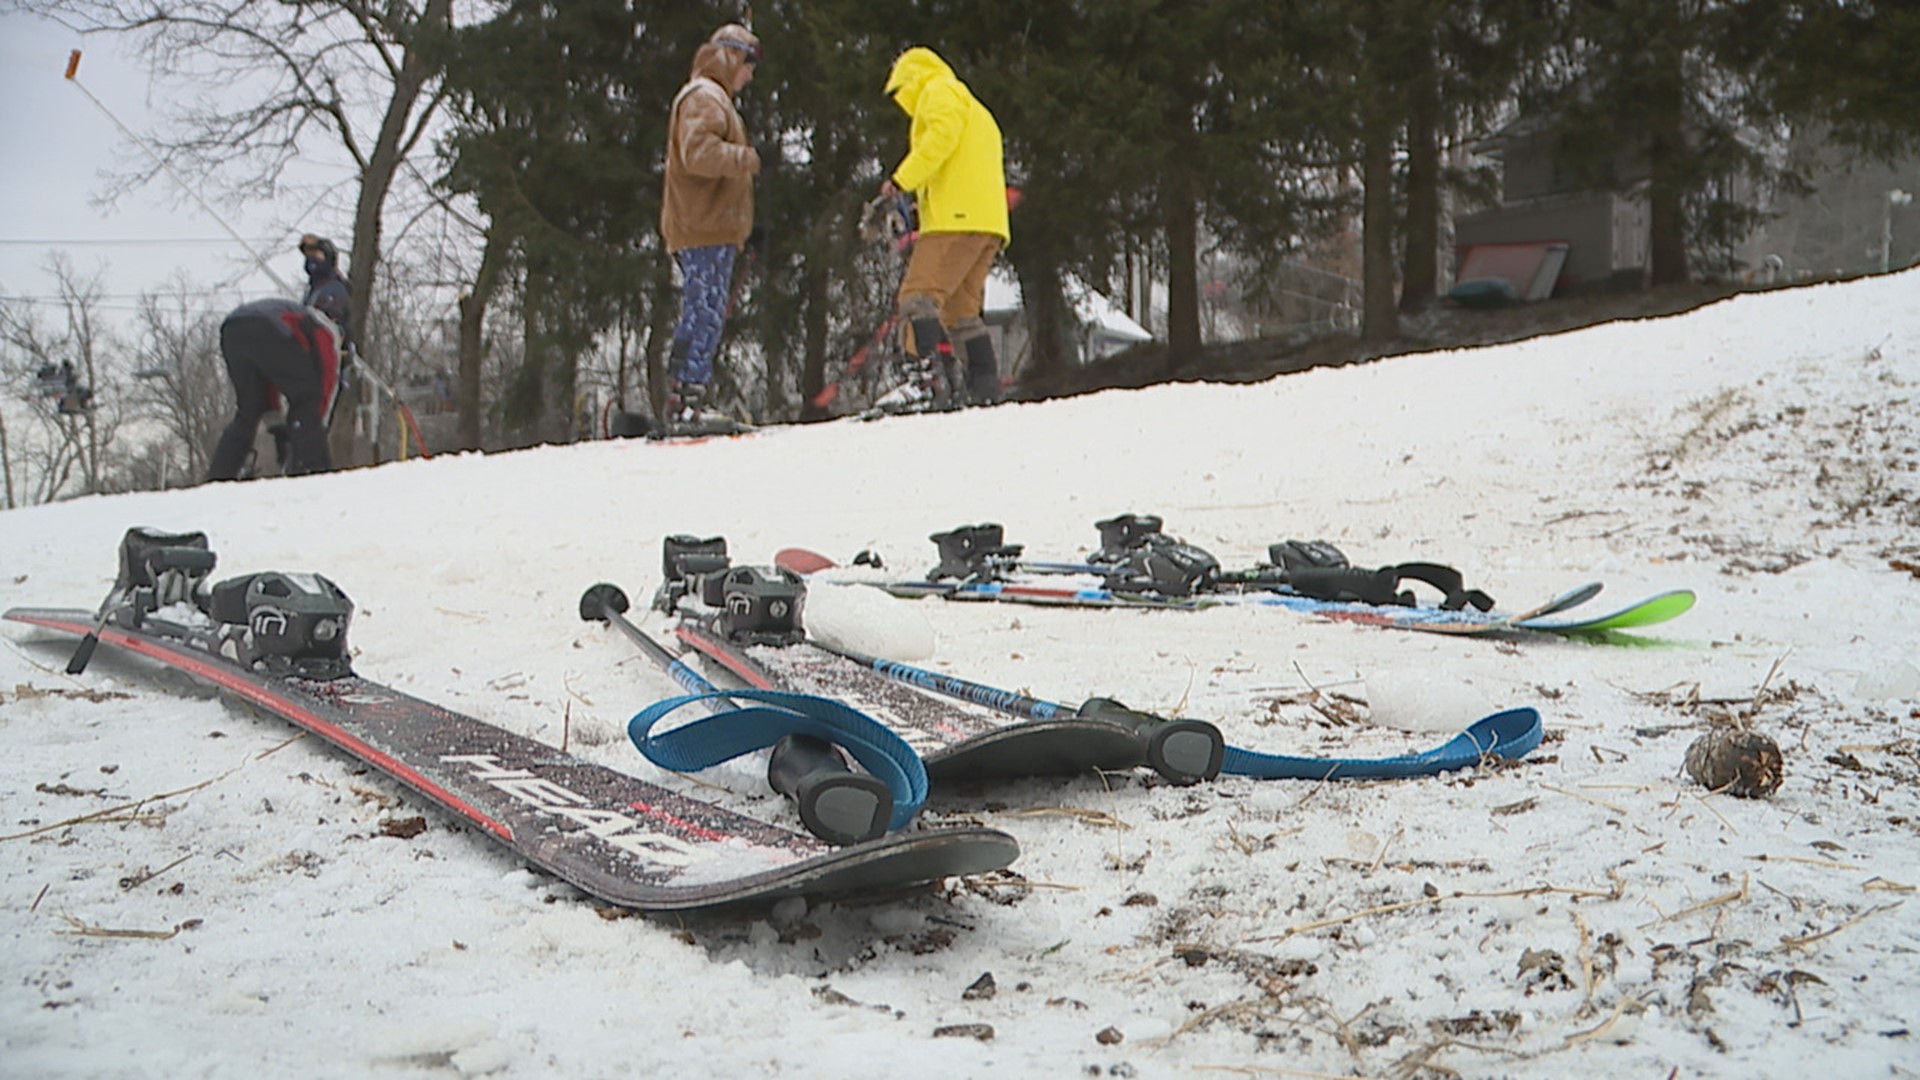 This week's expected winter weather has some outdoor sports enthusiasts hoping for more powder on the slopes.